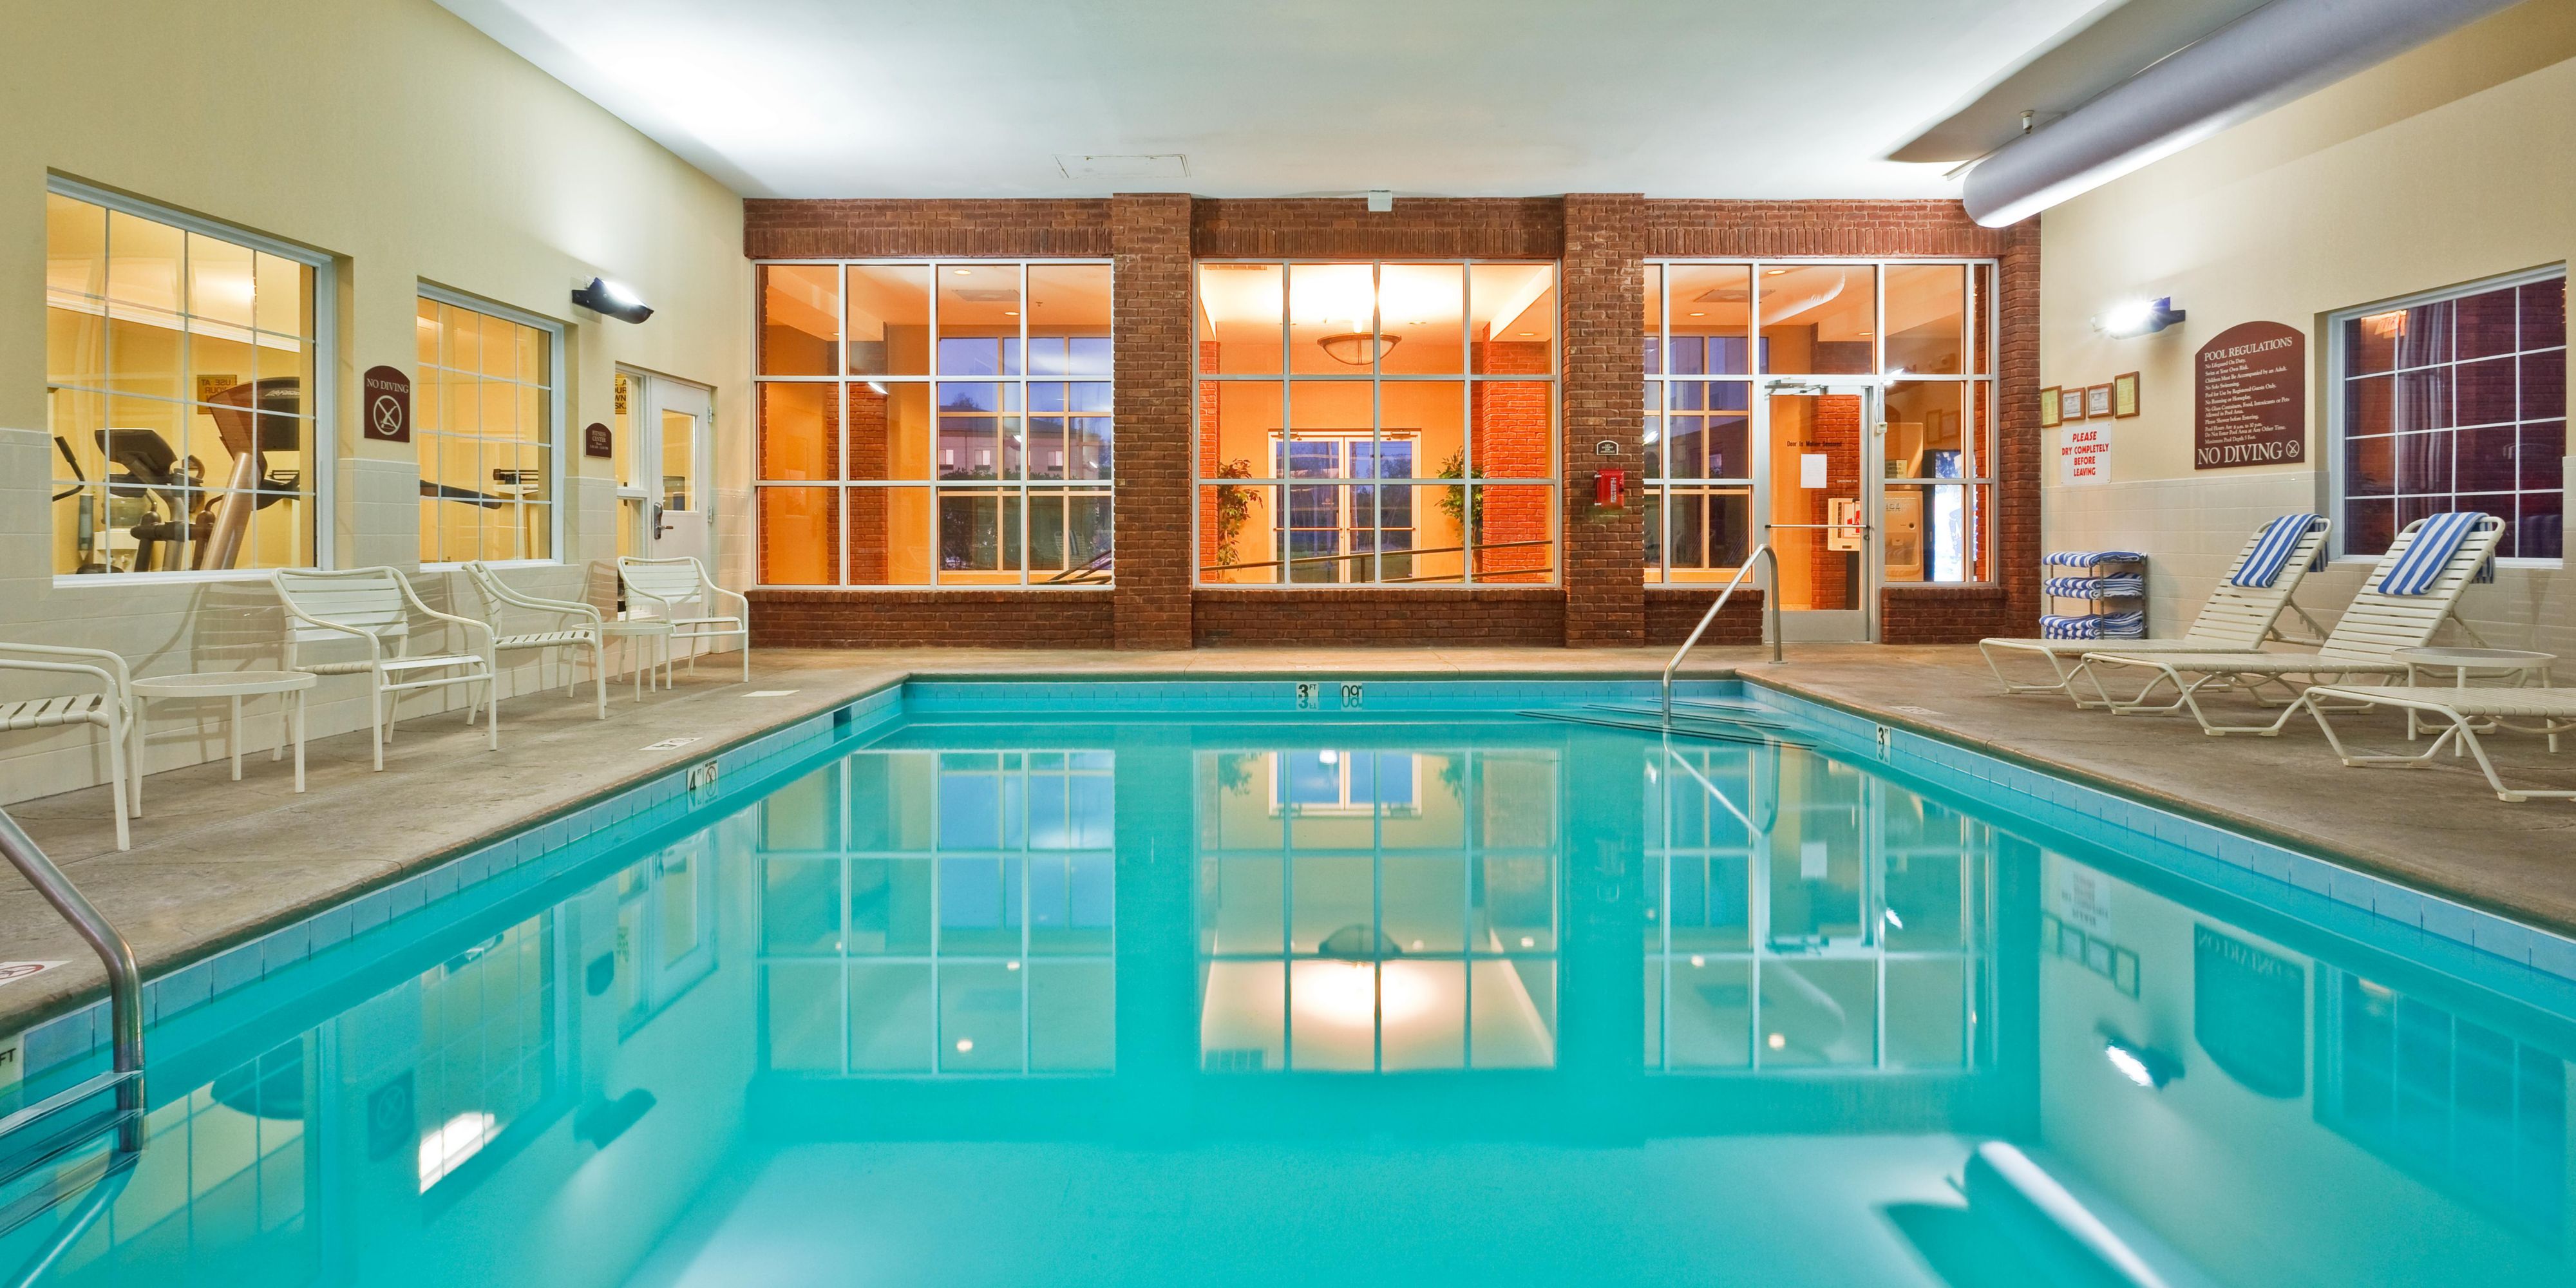 Our pool and fitness center are currently open, but we are limiting the capacity so we can socially distance. 